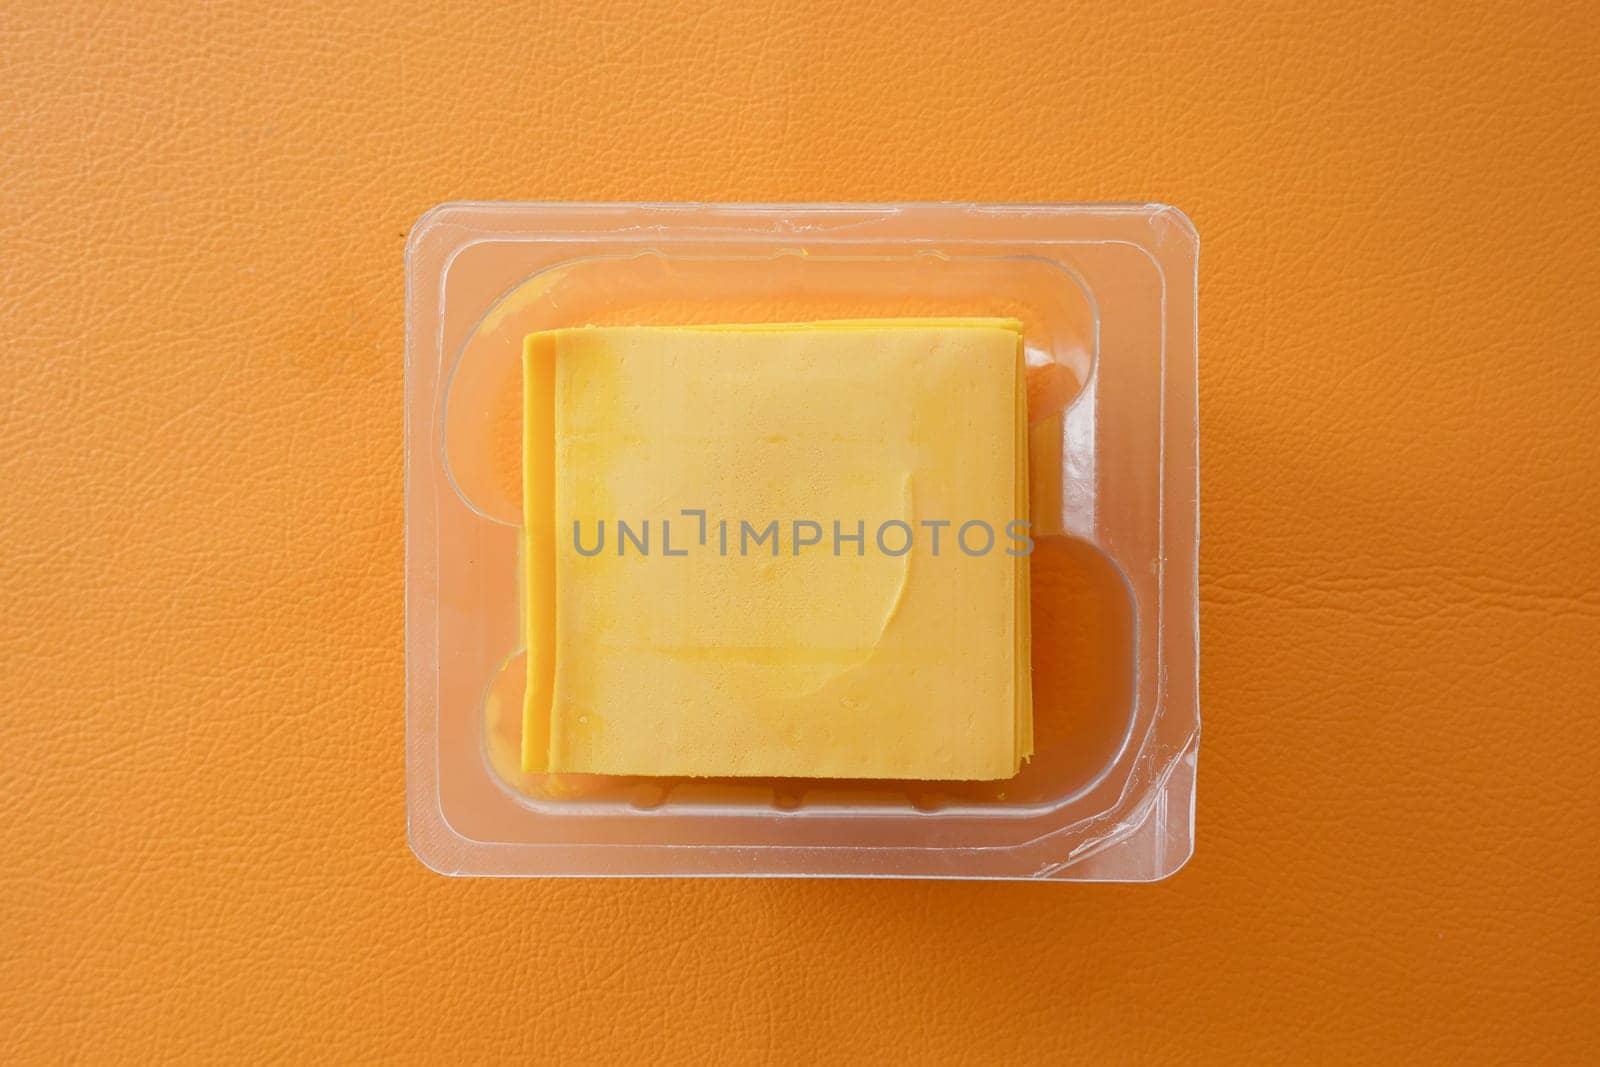 slices of cheese in the package on orange background.